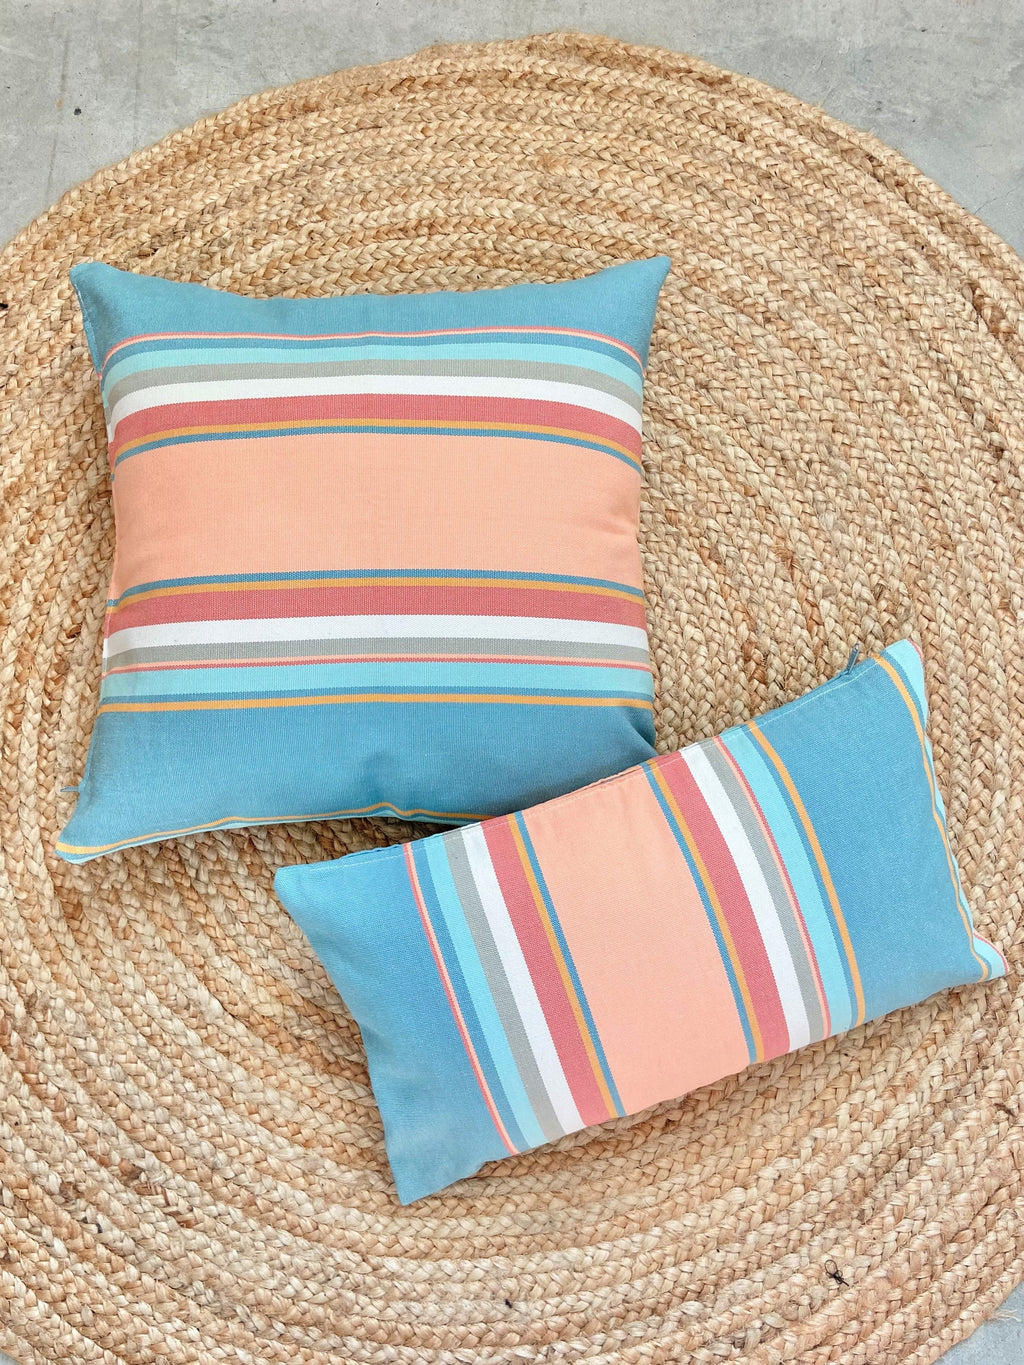 pink and light blue throw pillow cover 